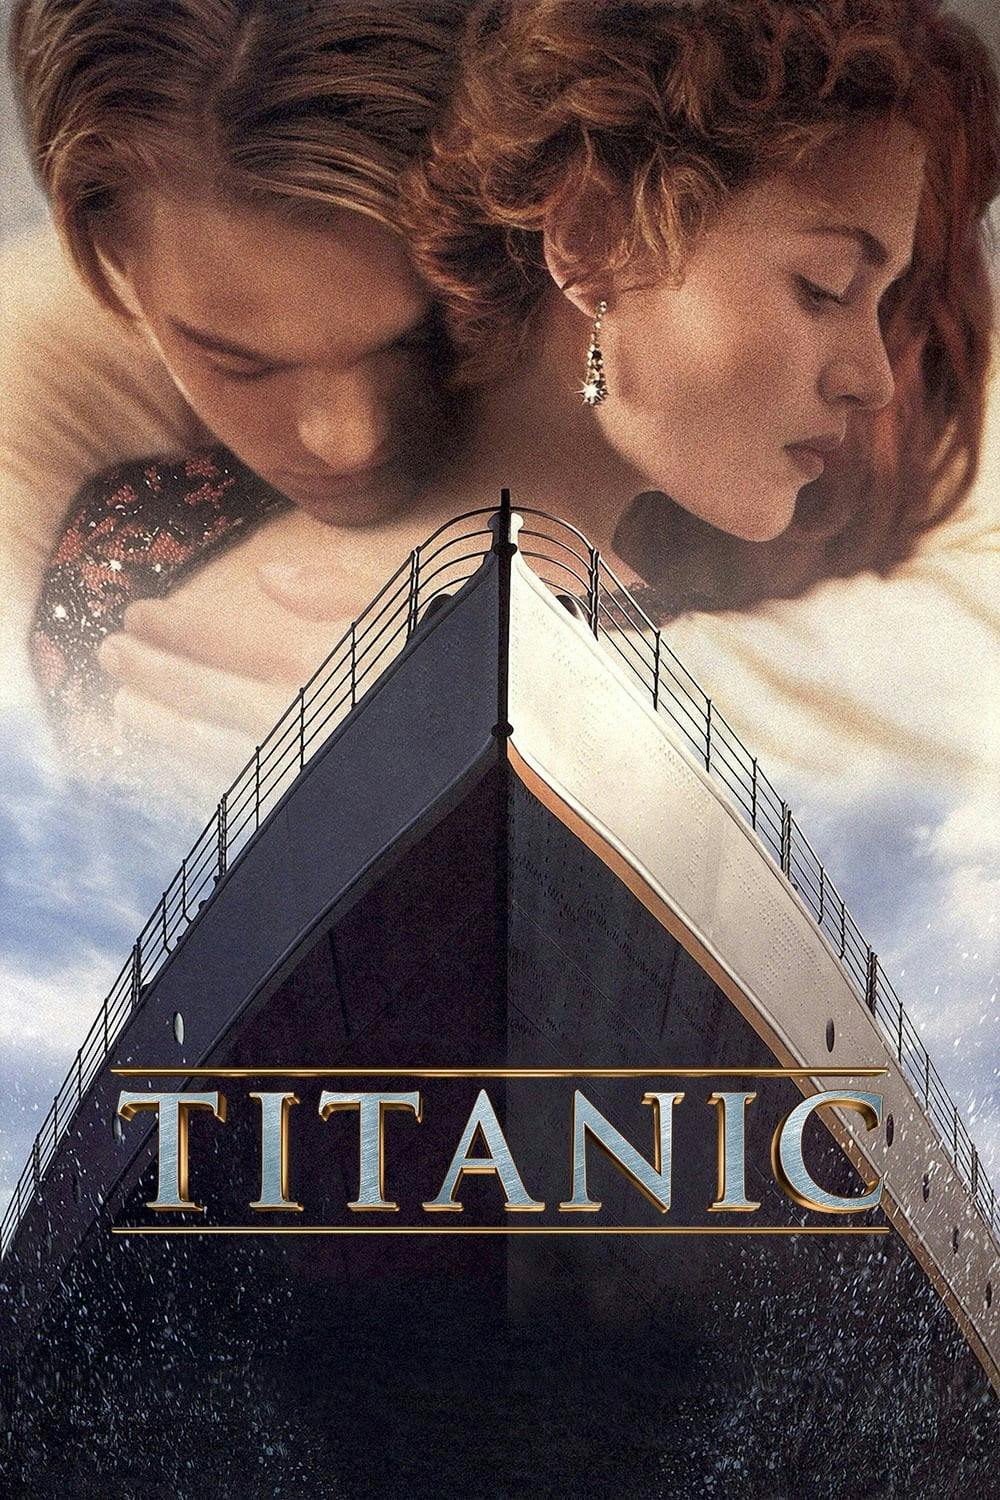 Best Kate Winslet movies to watch on Amazon or iTunes